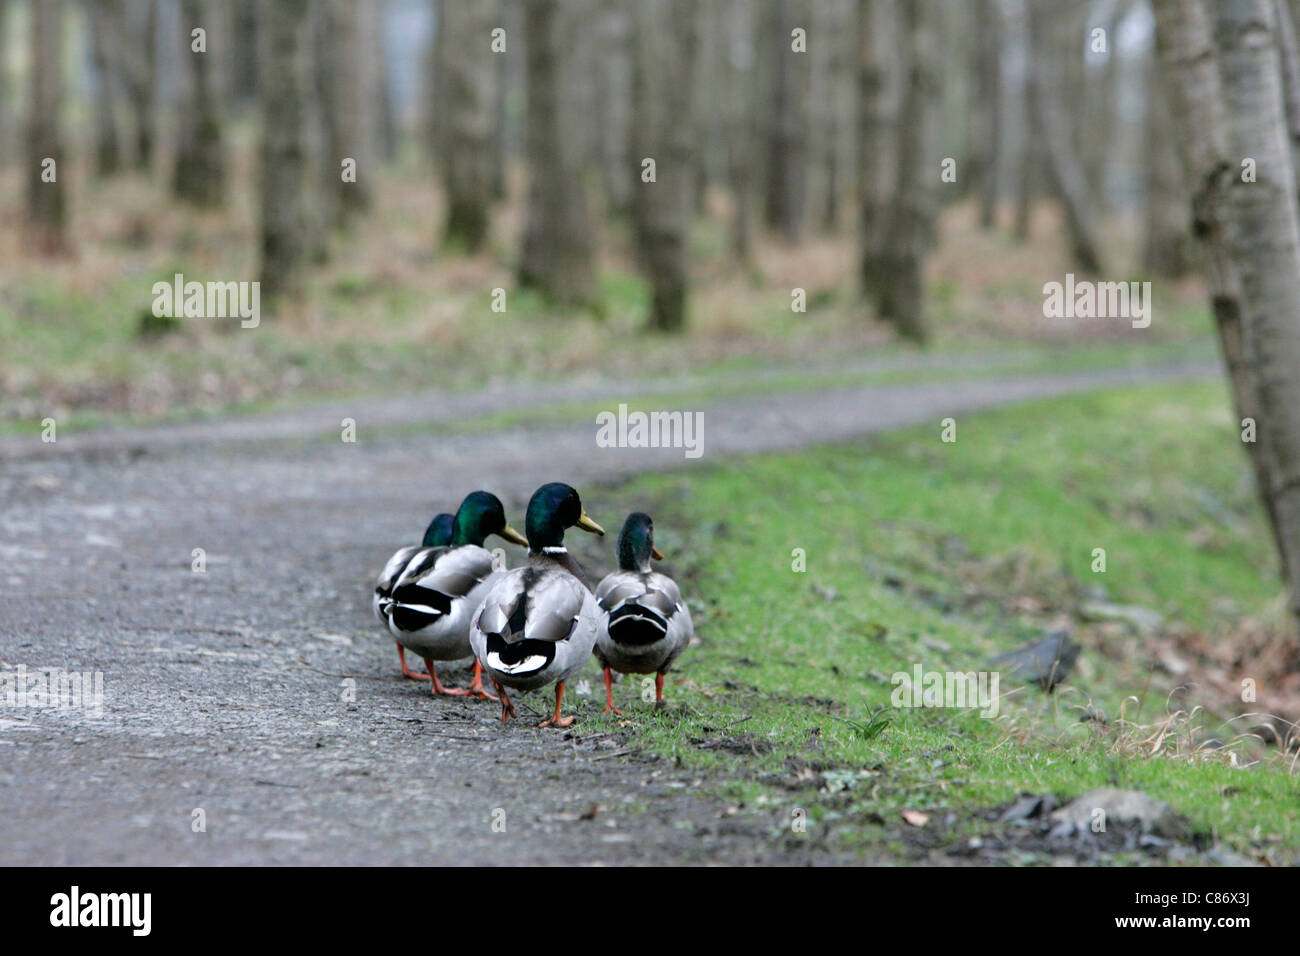 Wild ducks on a woodland path on a free range farm in County Armagh Northern Ireland as fear of an outbreak of the avian bird flu H5N1 in the UK increases. It is feared that migrating wild birds will bring the disease to the UK domestic stocks. Stock Photo